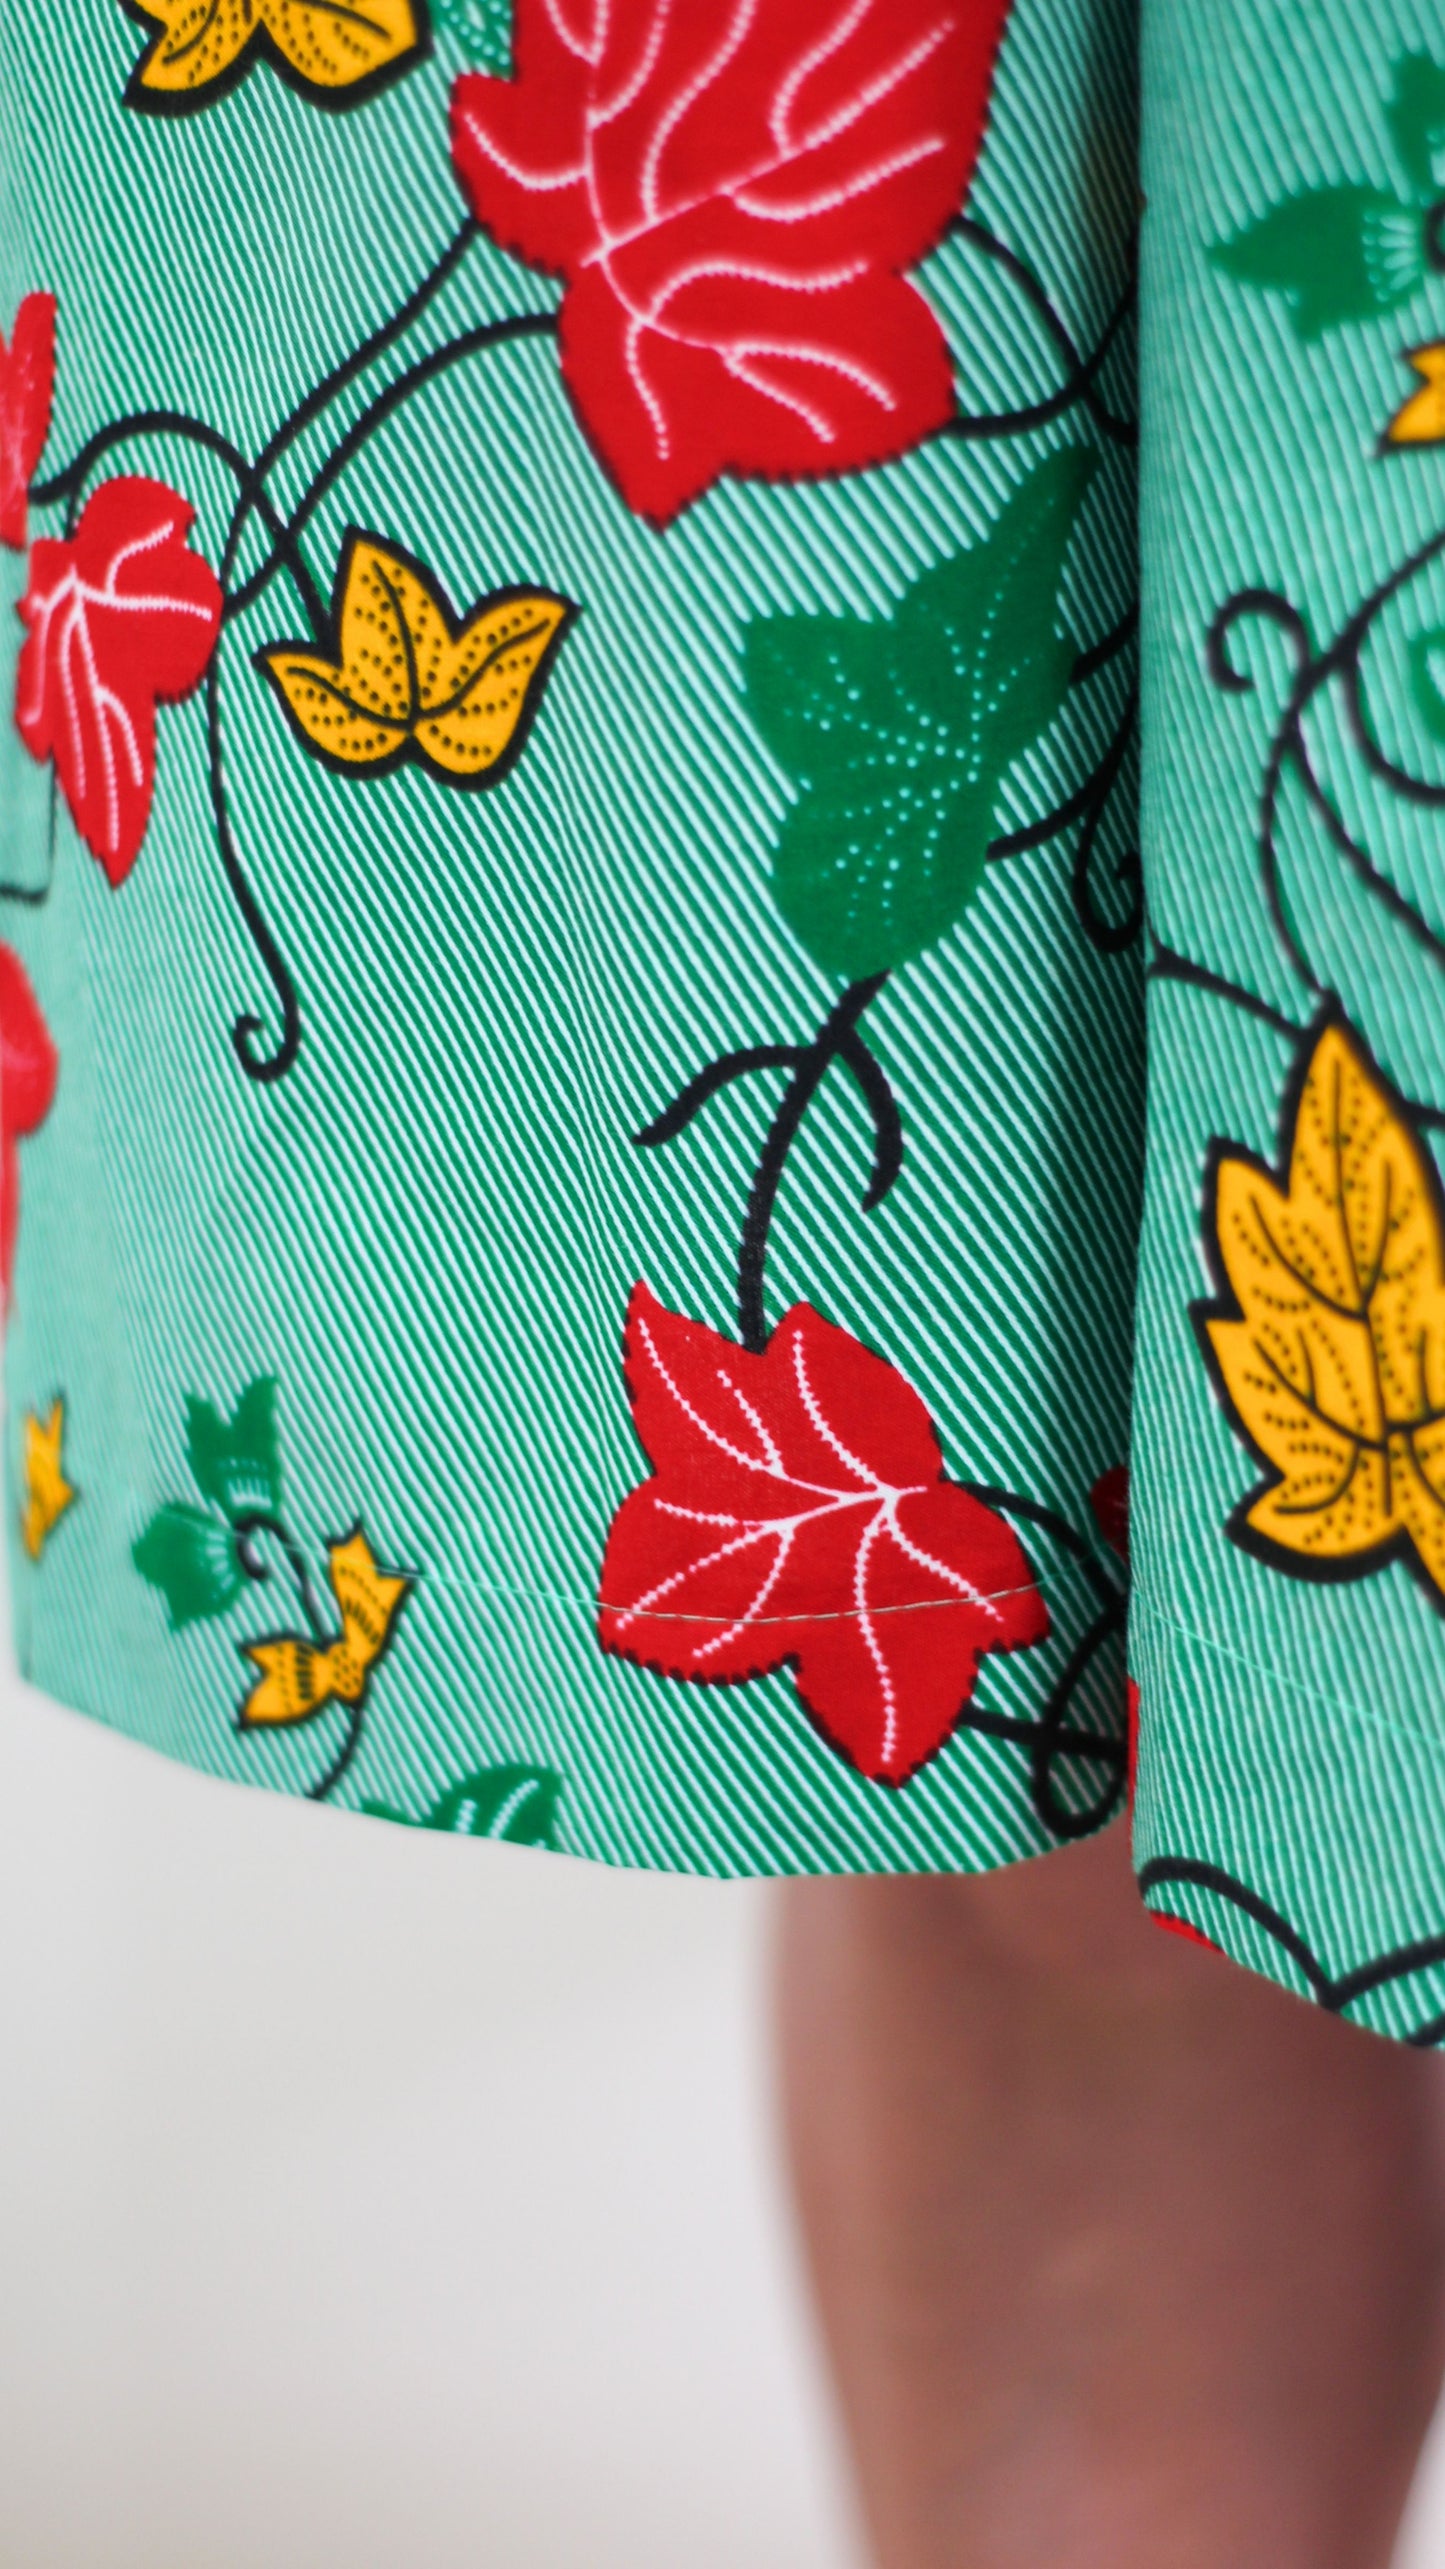 A close up of the red, green and orange leaf design elements of the green fabric print dress.